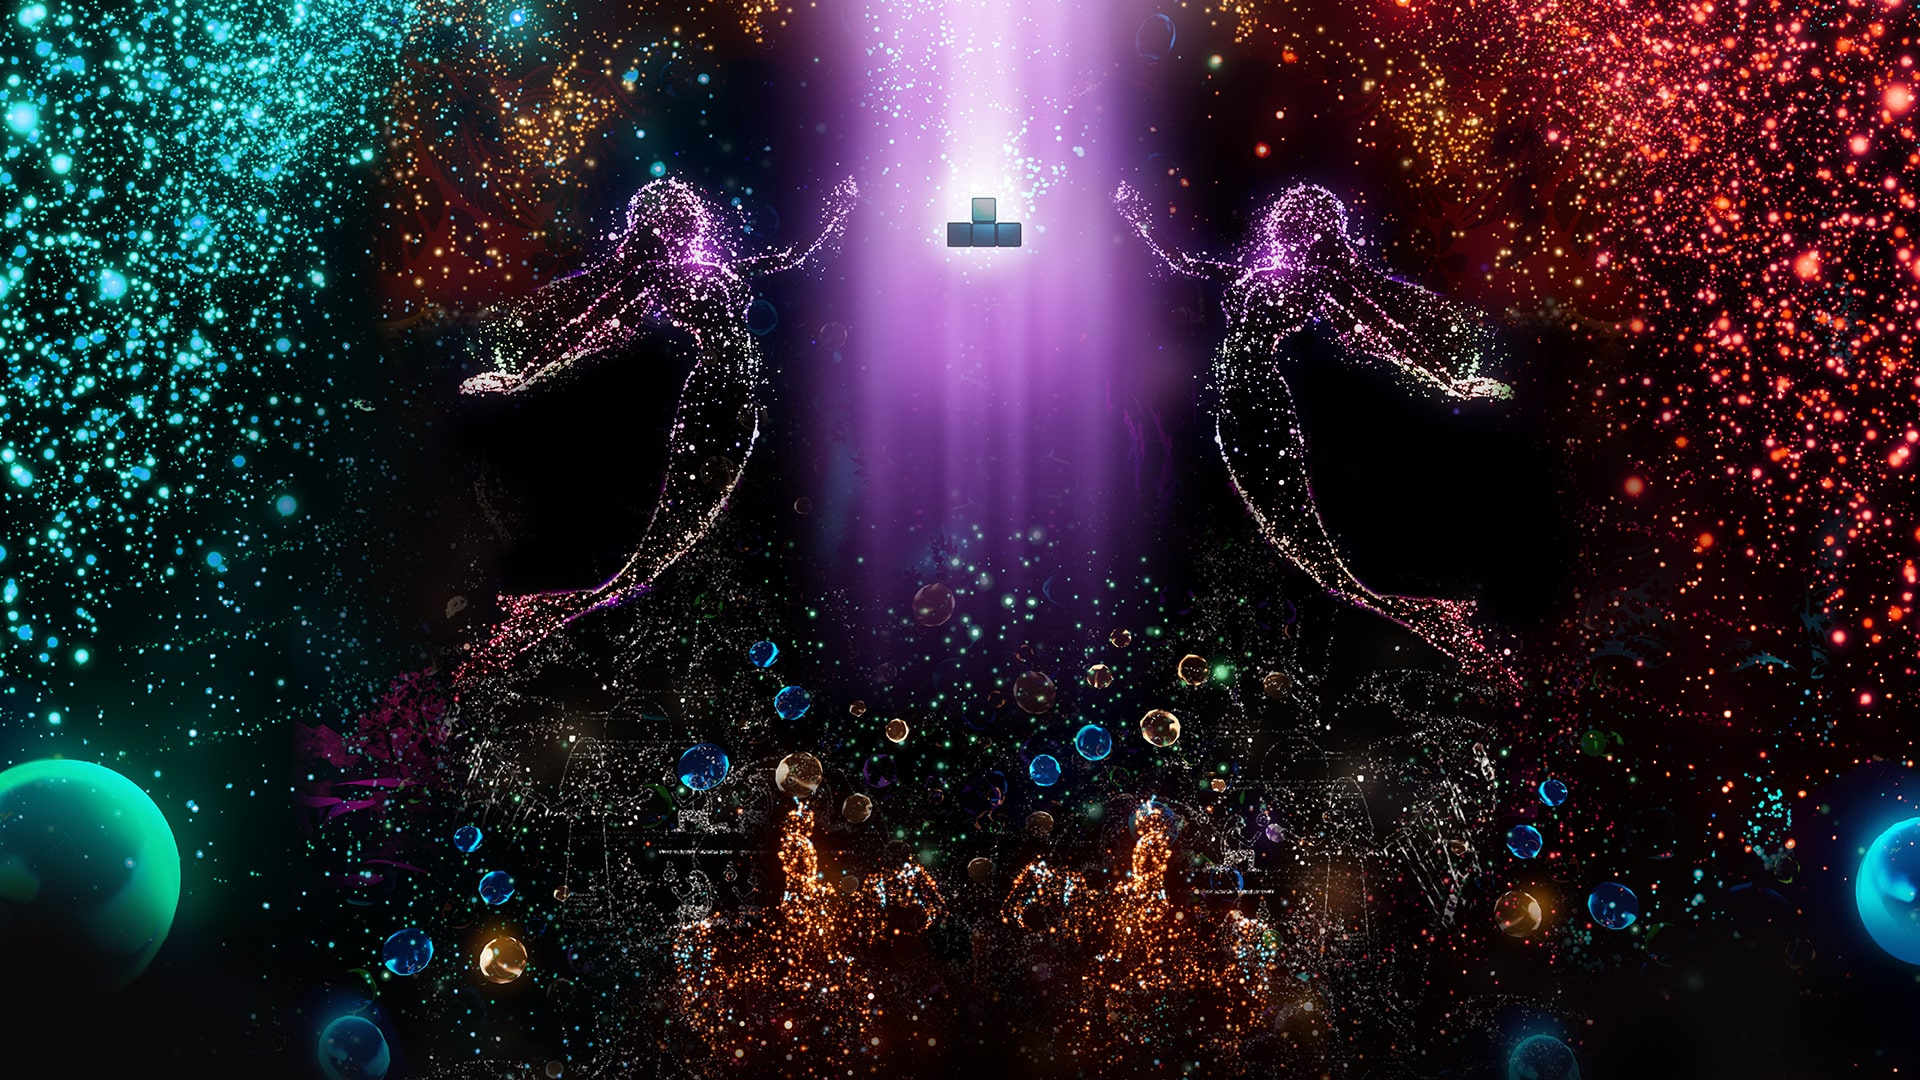 Tetris Effect Vinyl Soundtrack Coming As Part Of 1 Year Anniversary Celebrations Push Square